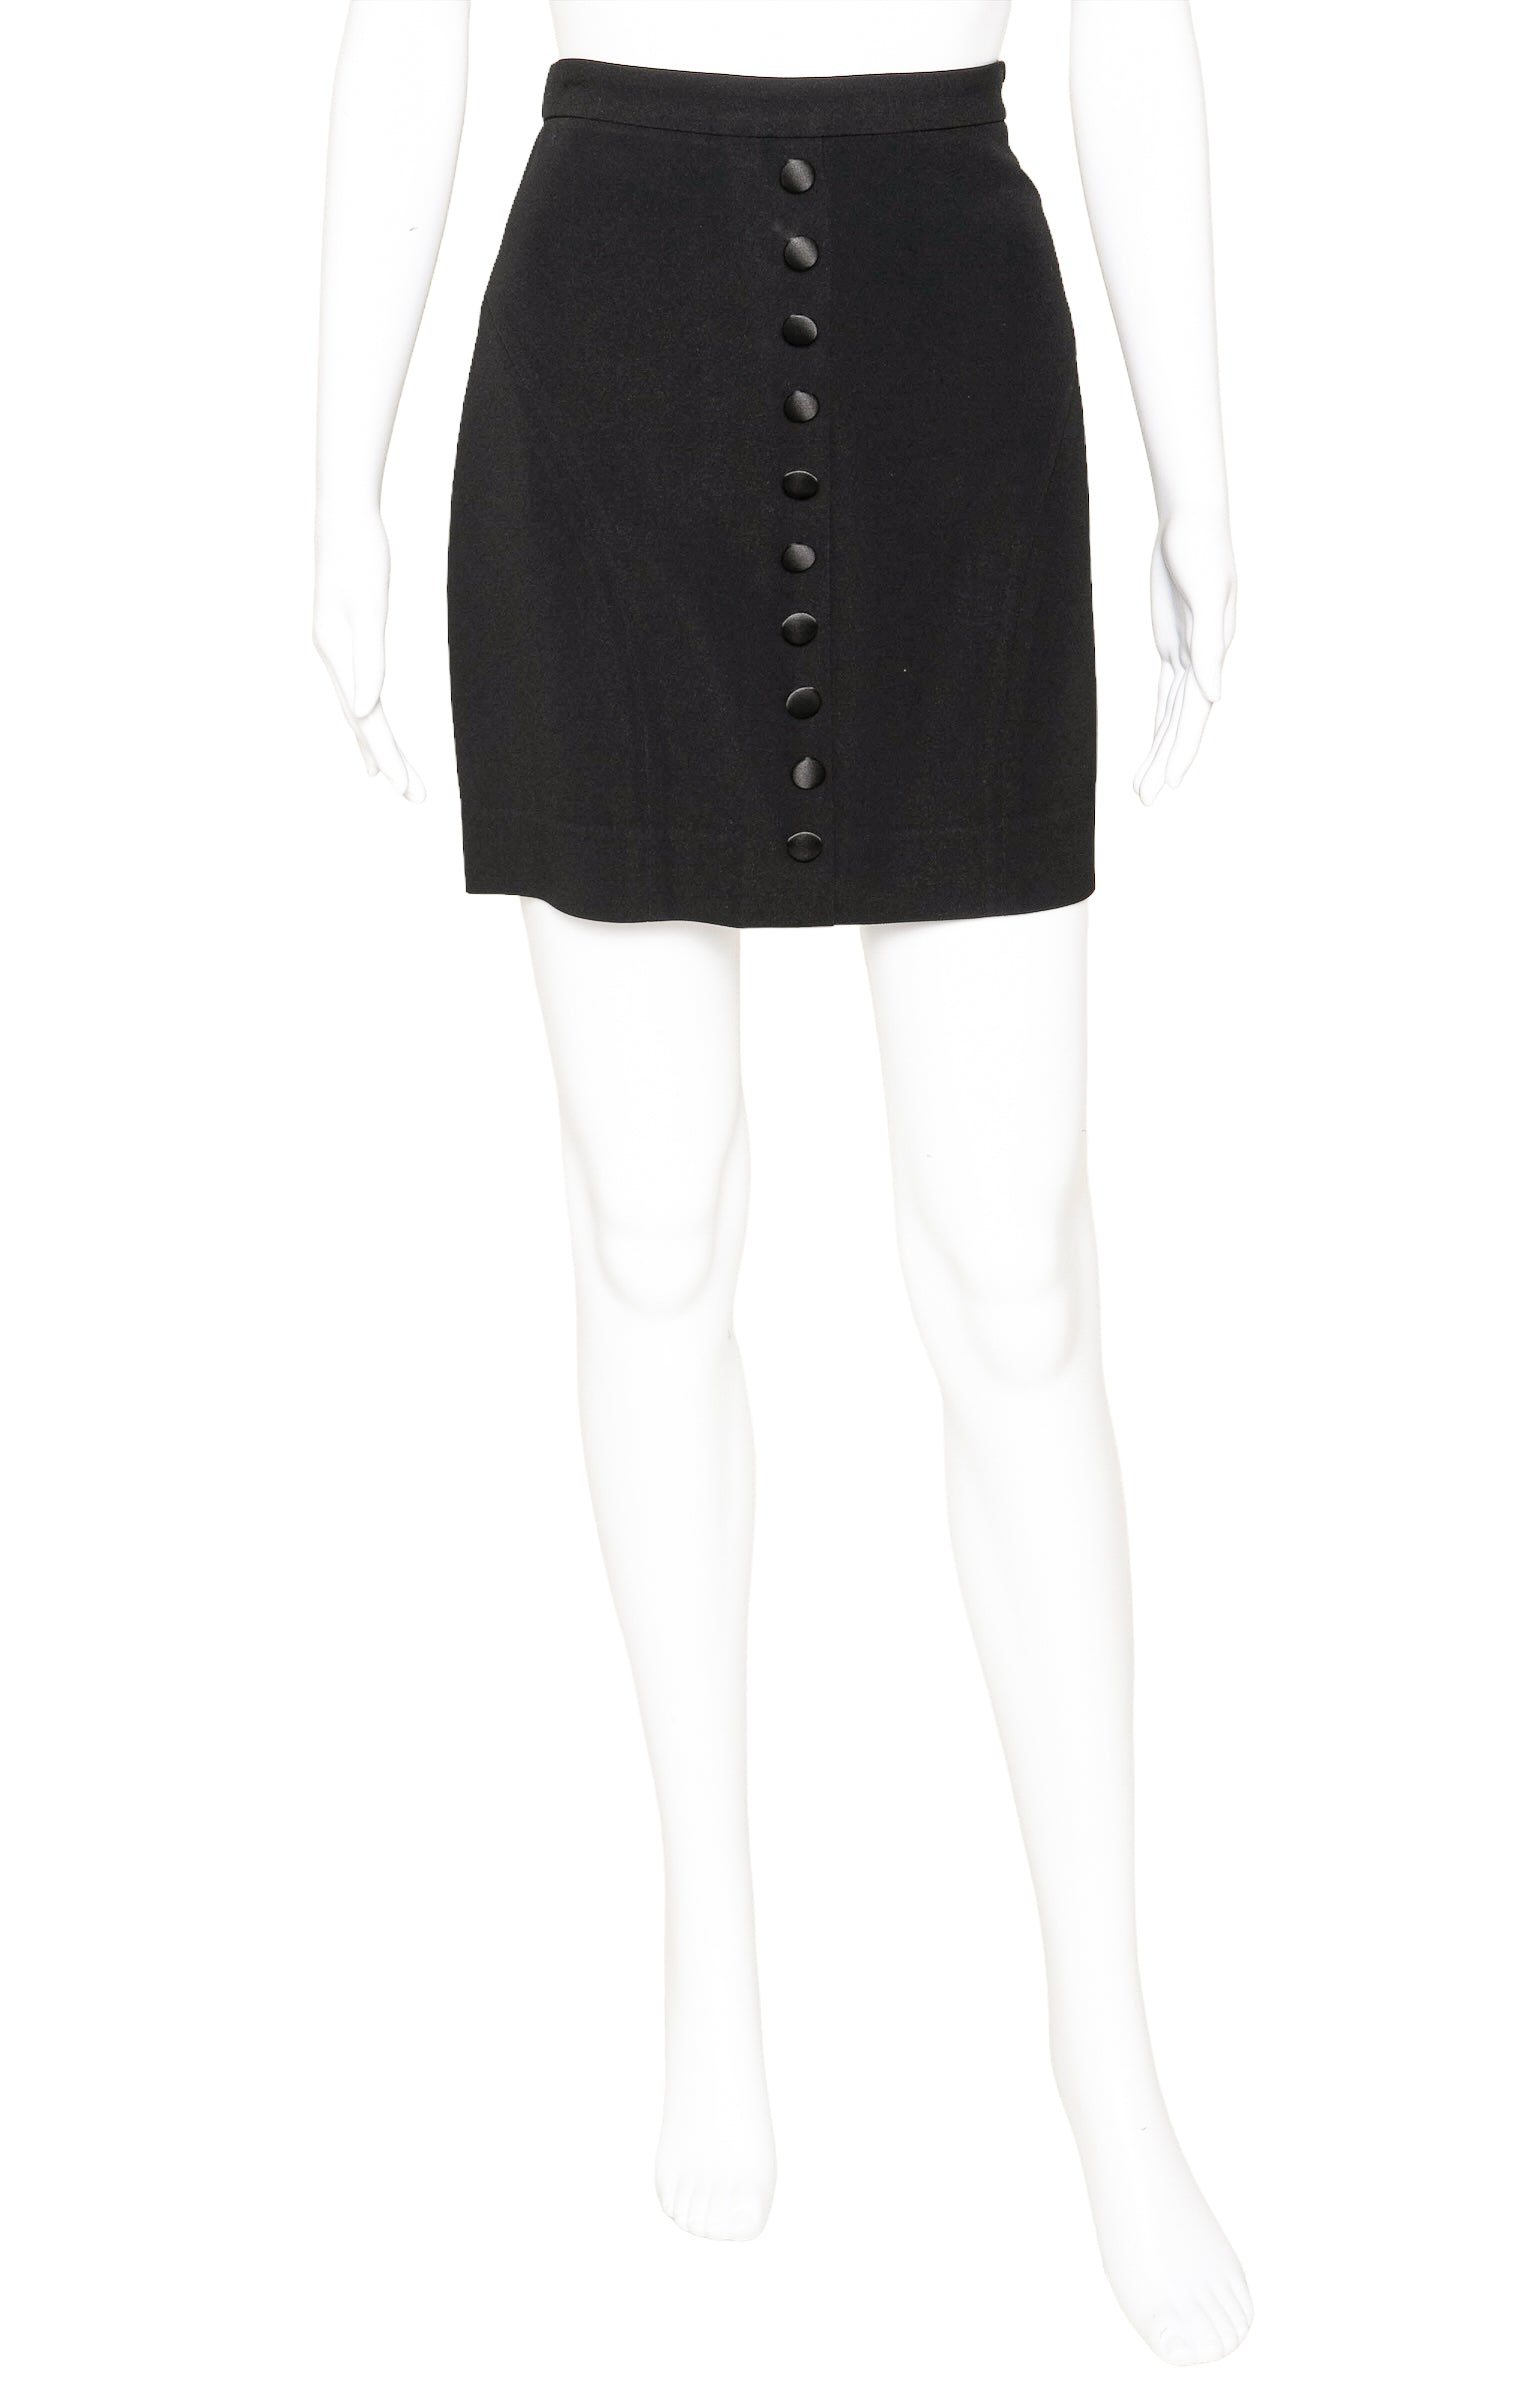 DOLCE & GABBANA (RARE) Skirt Size: IT 42 / Comparable to US 4-6